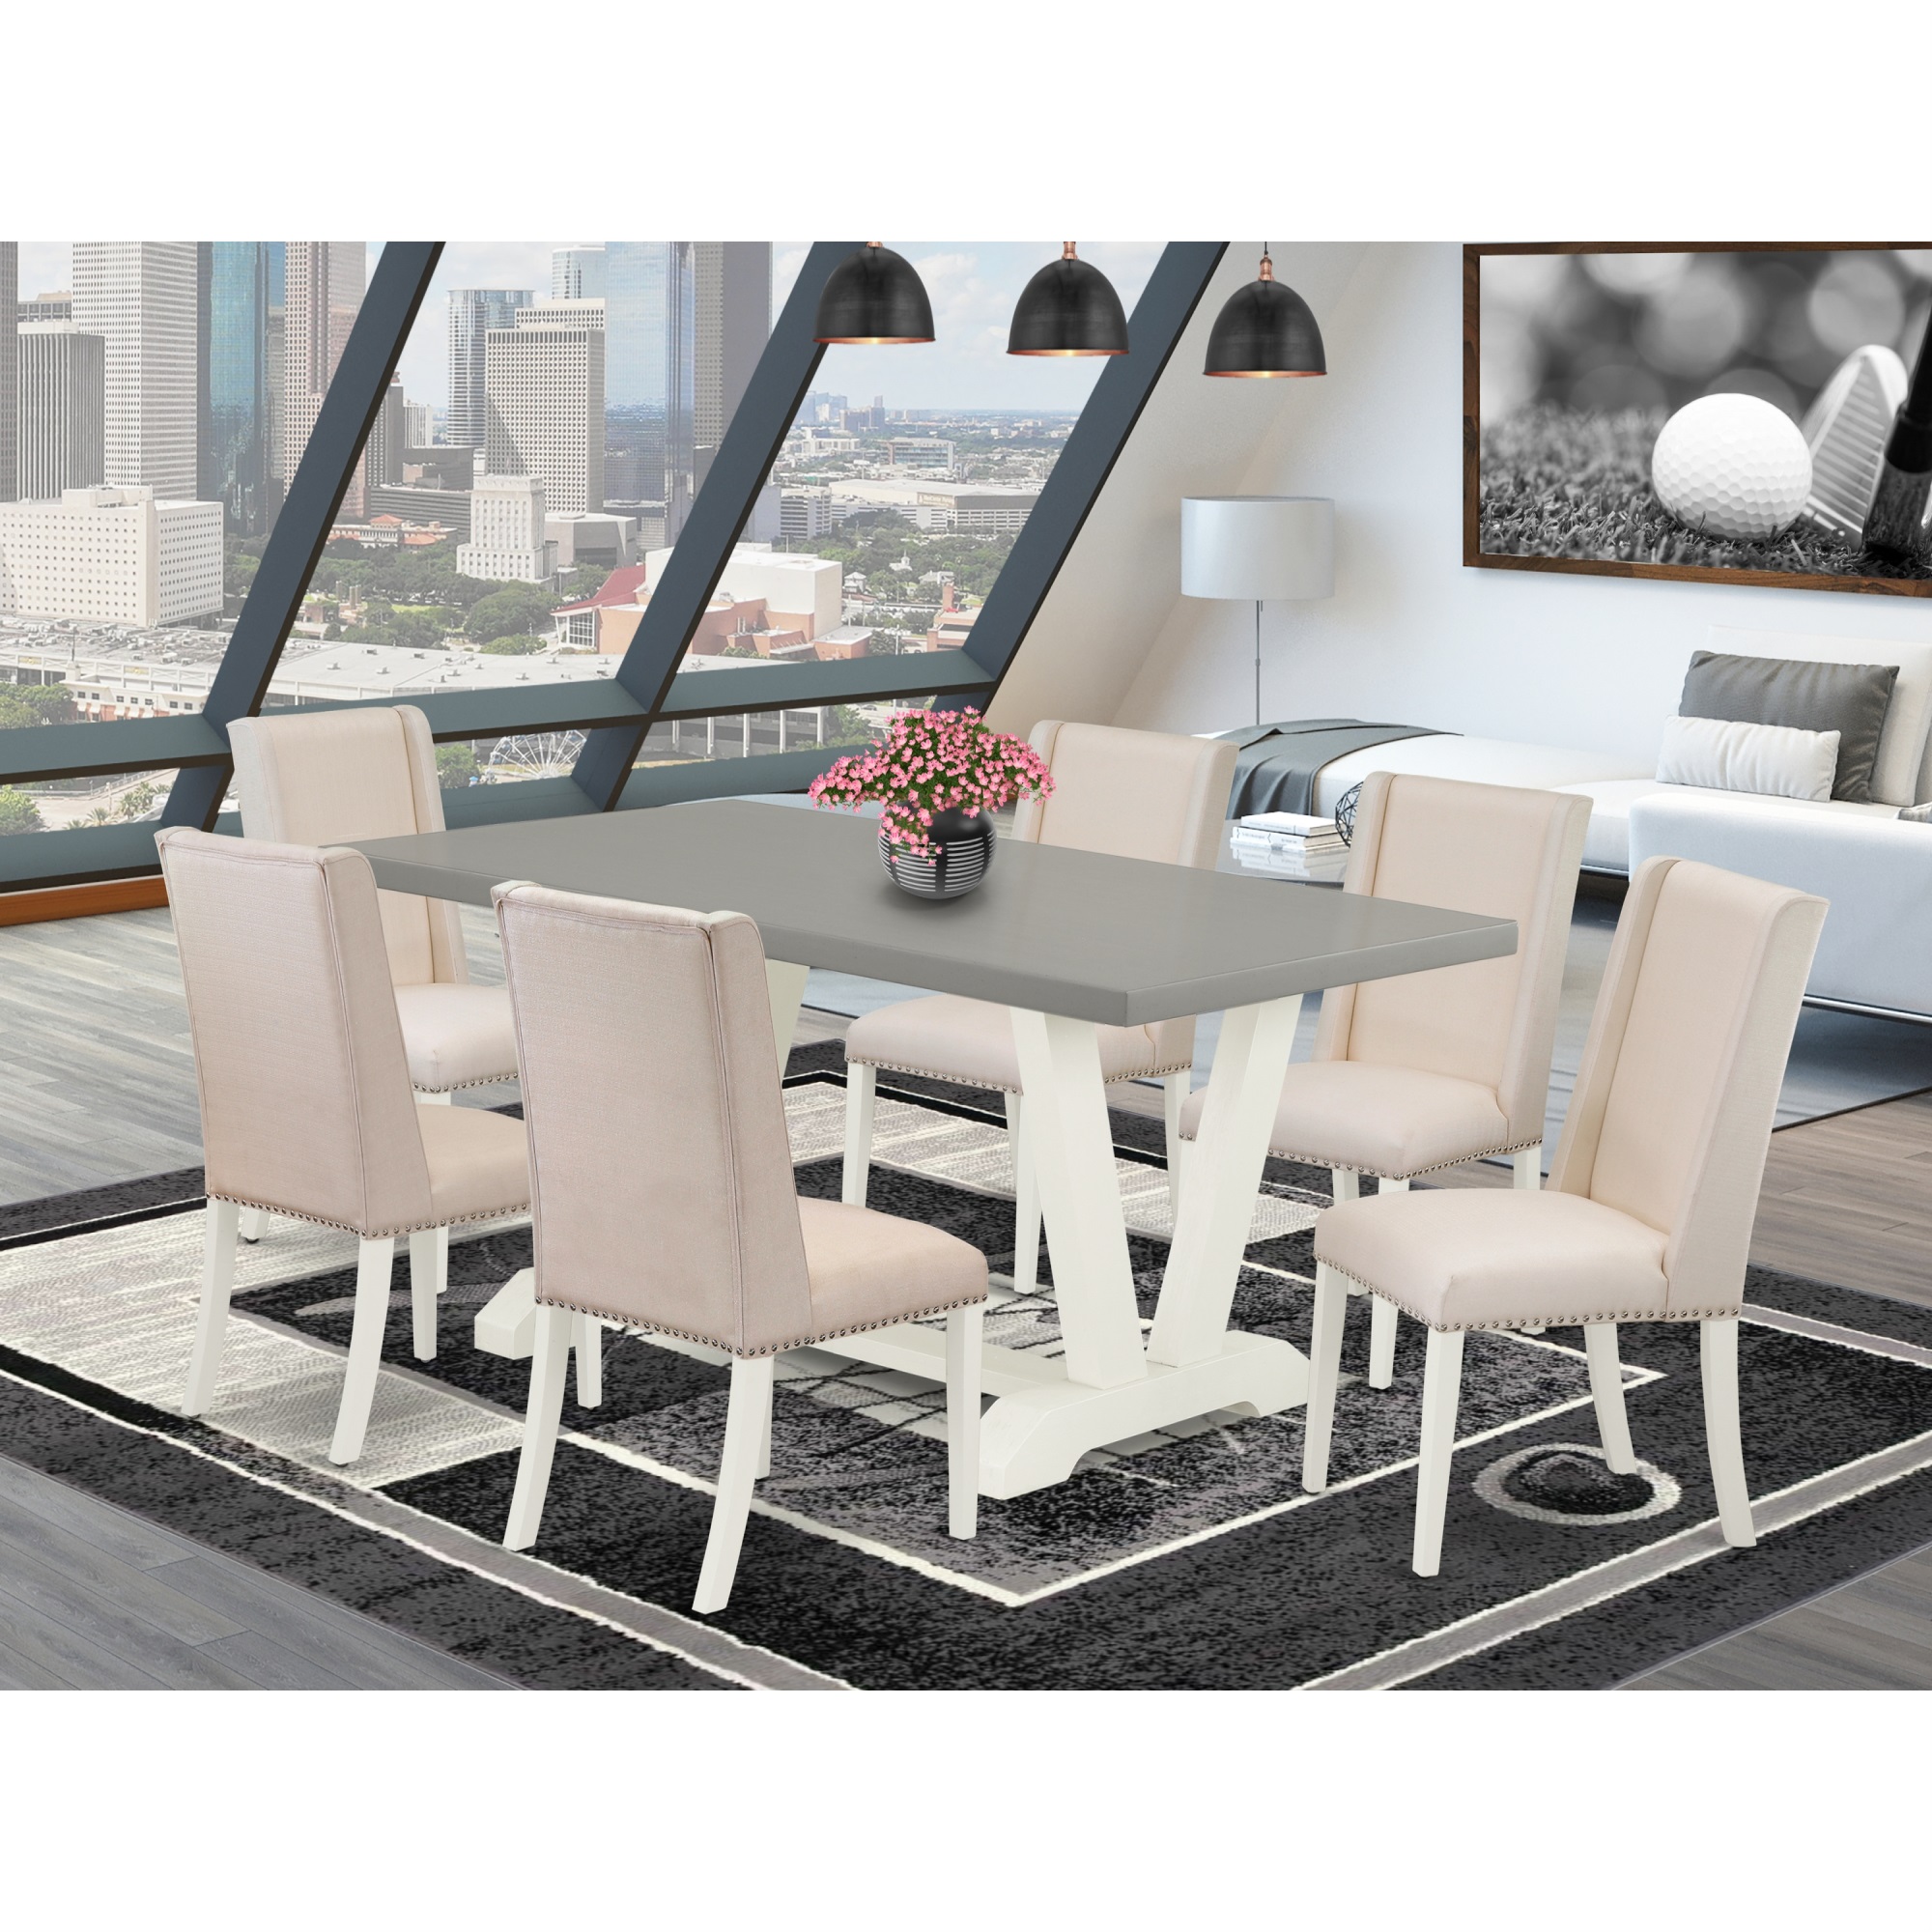 East West Furniture V096FL201-7 7-Piece Fashionable Dining Room Table Set an Outstanding Cement Color Kitchen Table Top 